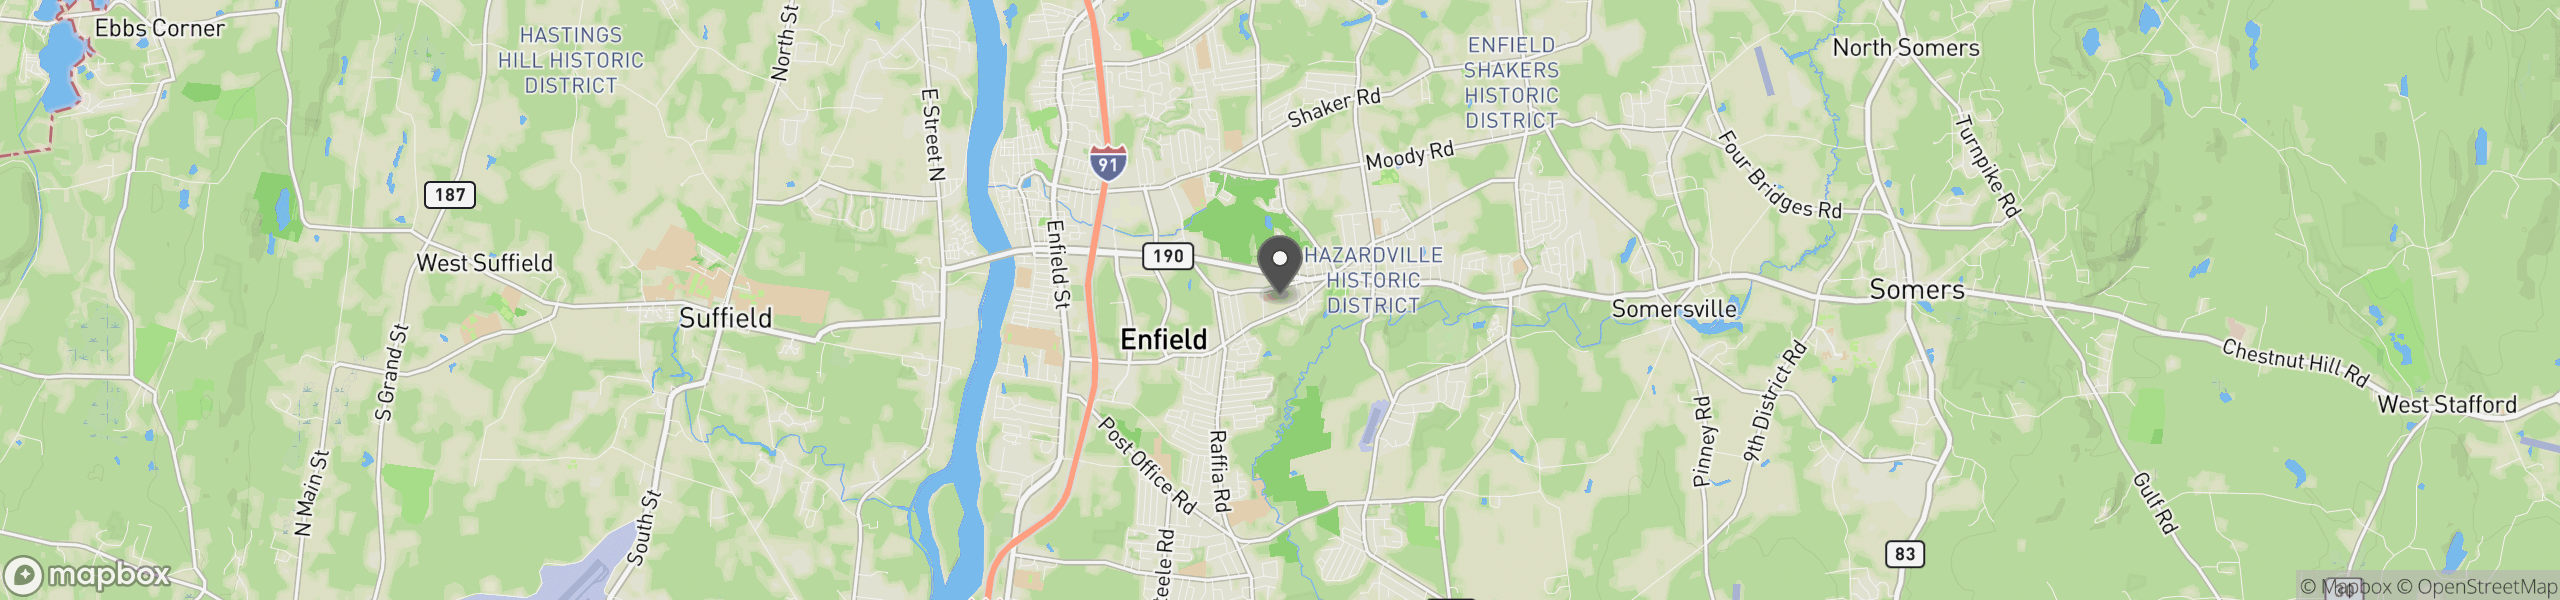 Enfield, CT 06082